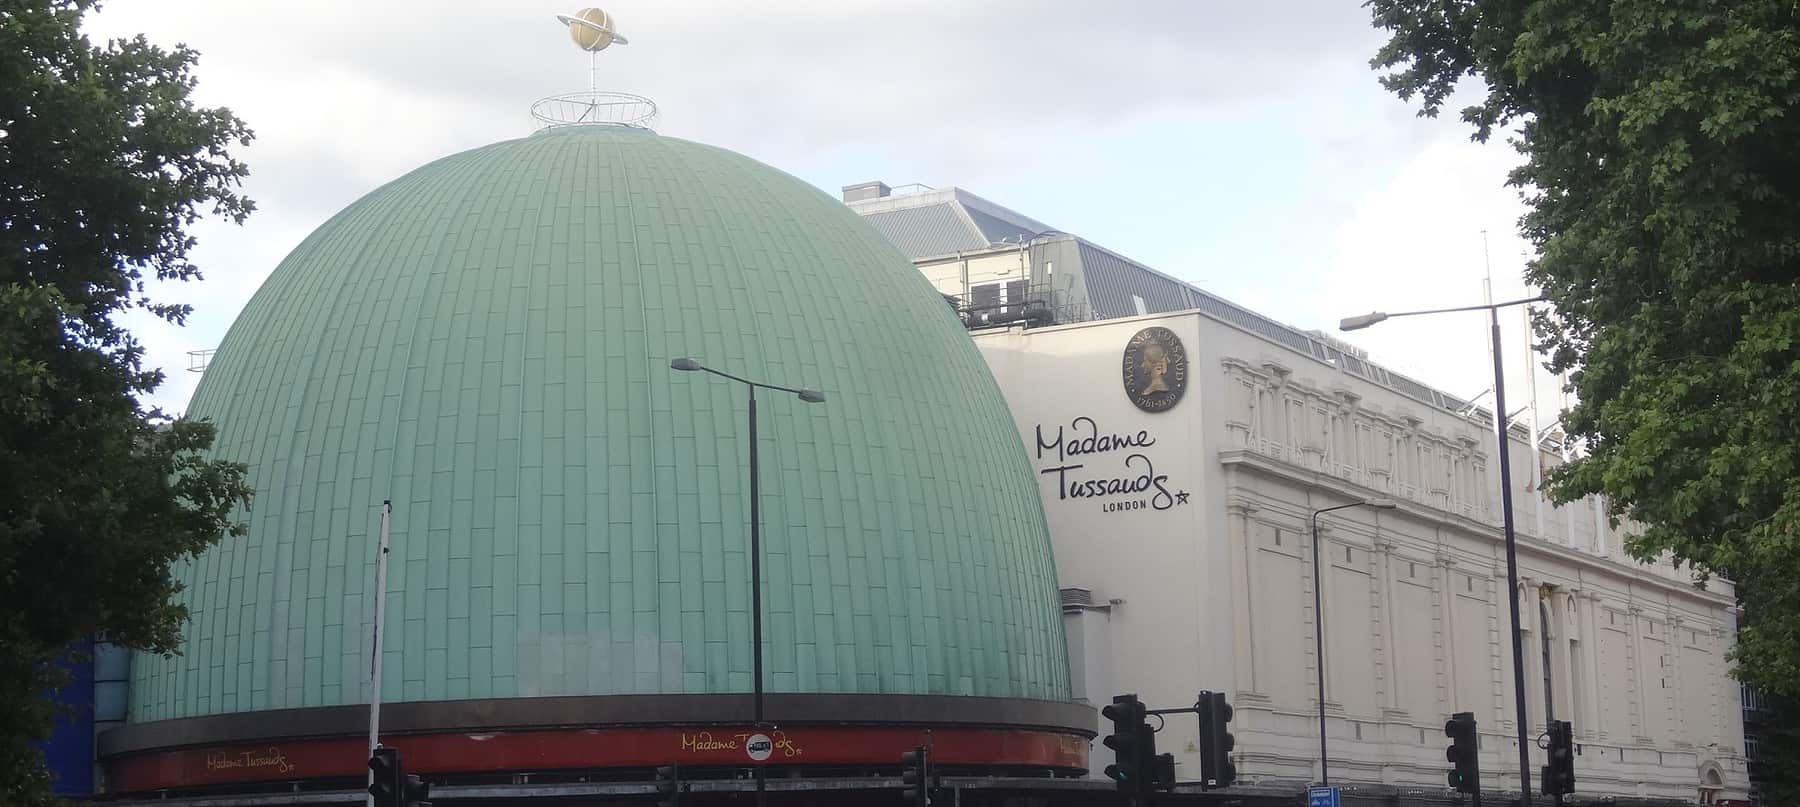 Madame Tussauds in London. Image Source: Wikimedia user Jordiferrer under the Creative Commons Attribution-Share Alike 4.0 International license. https://creativecommons.org/licenses/by-sa/4.0/deed.en